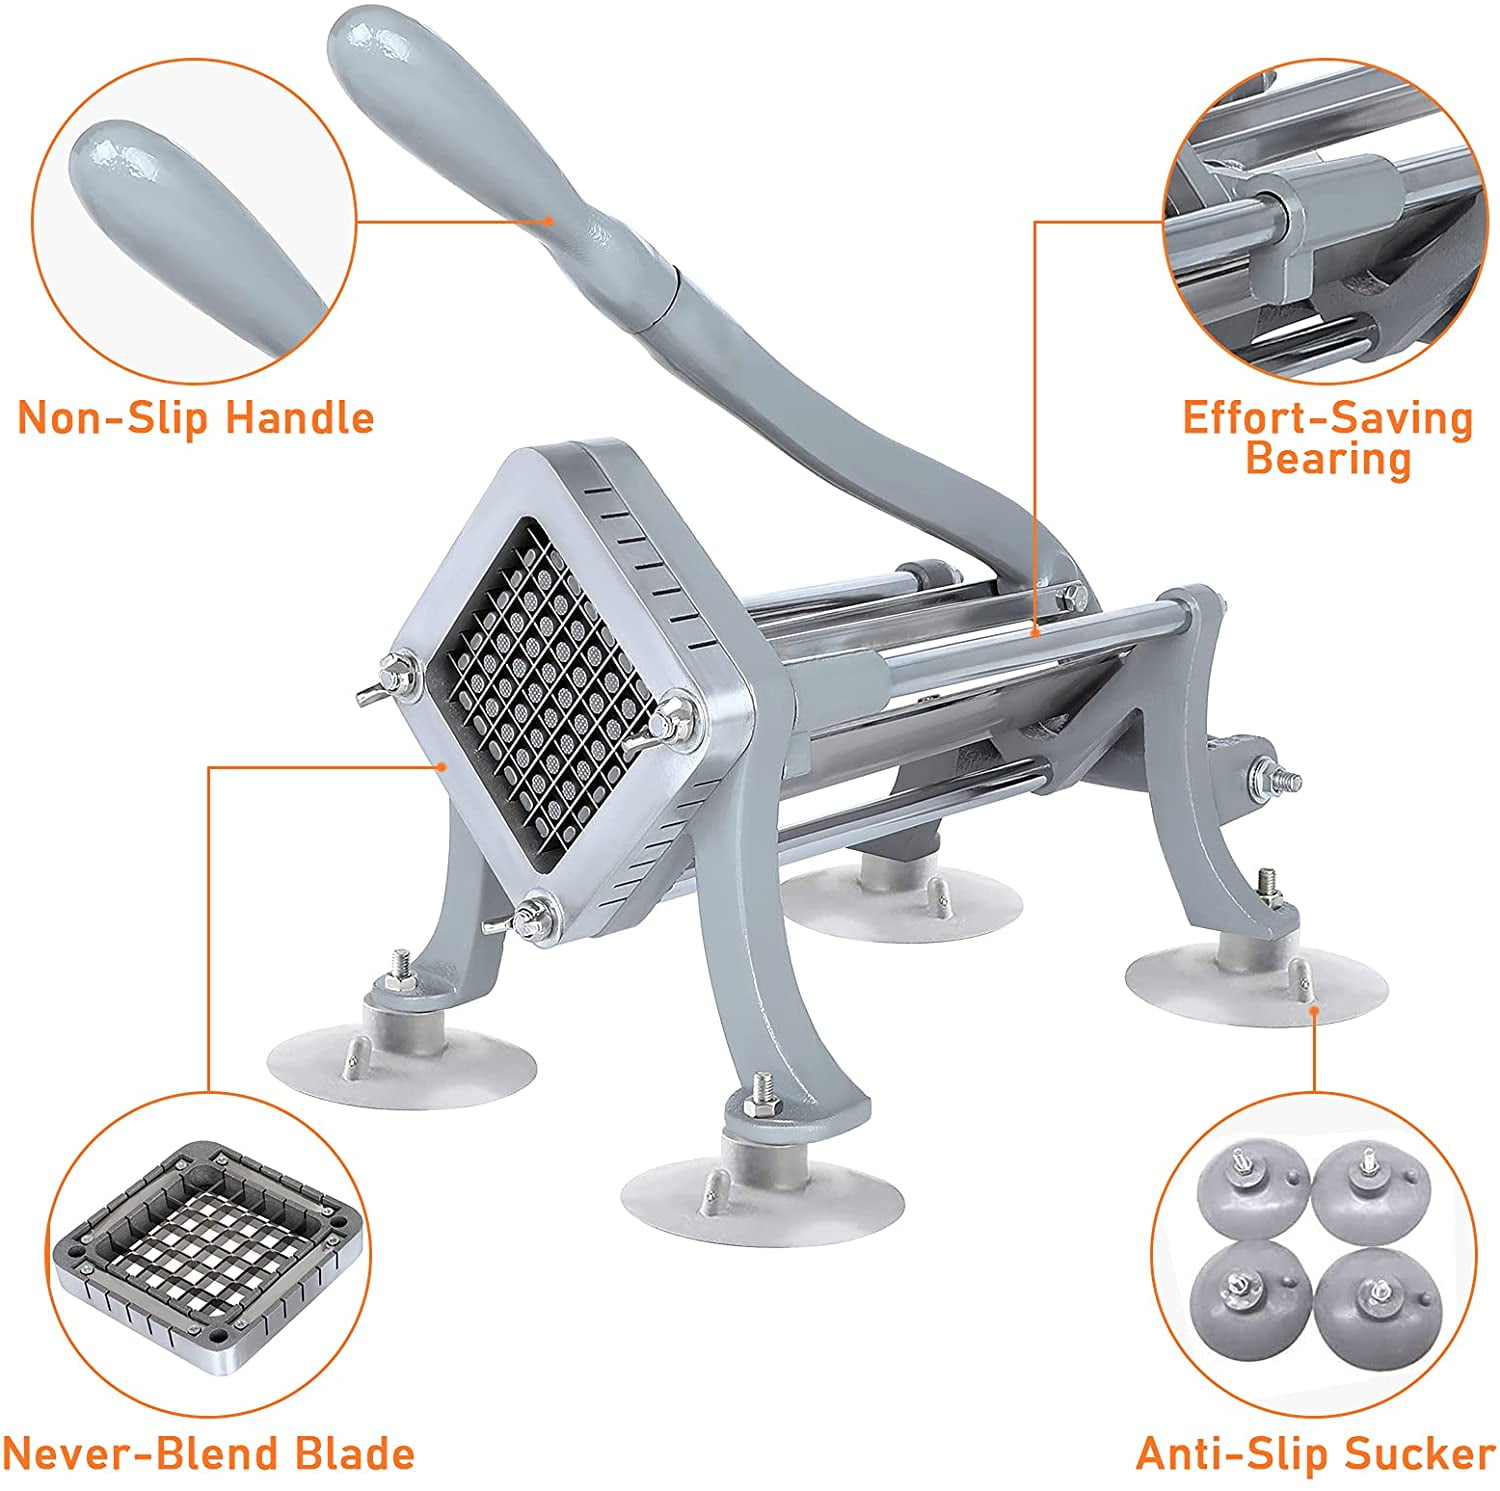 Lem French Fry Cutter